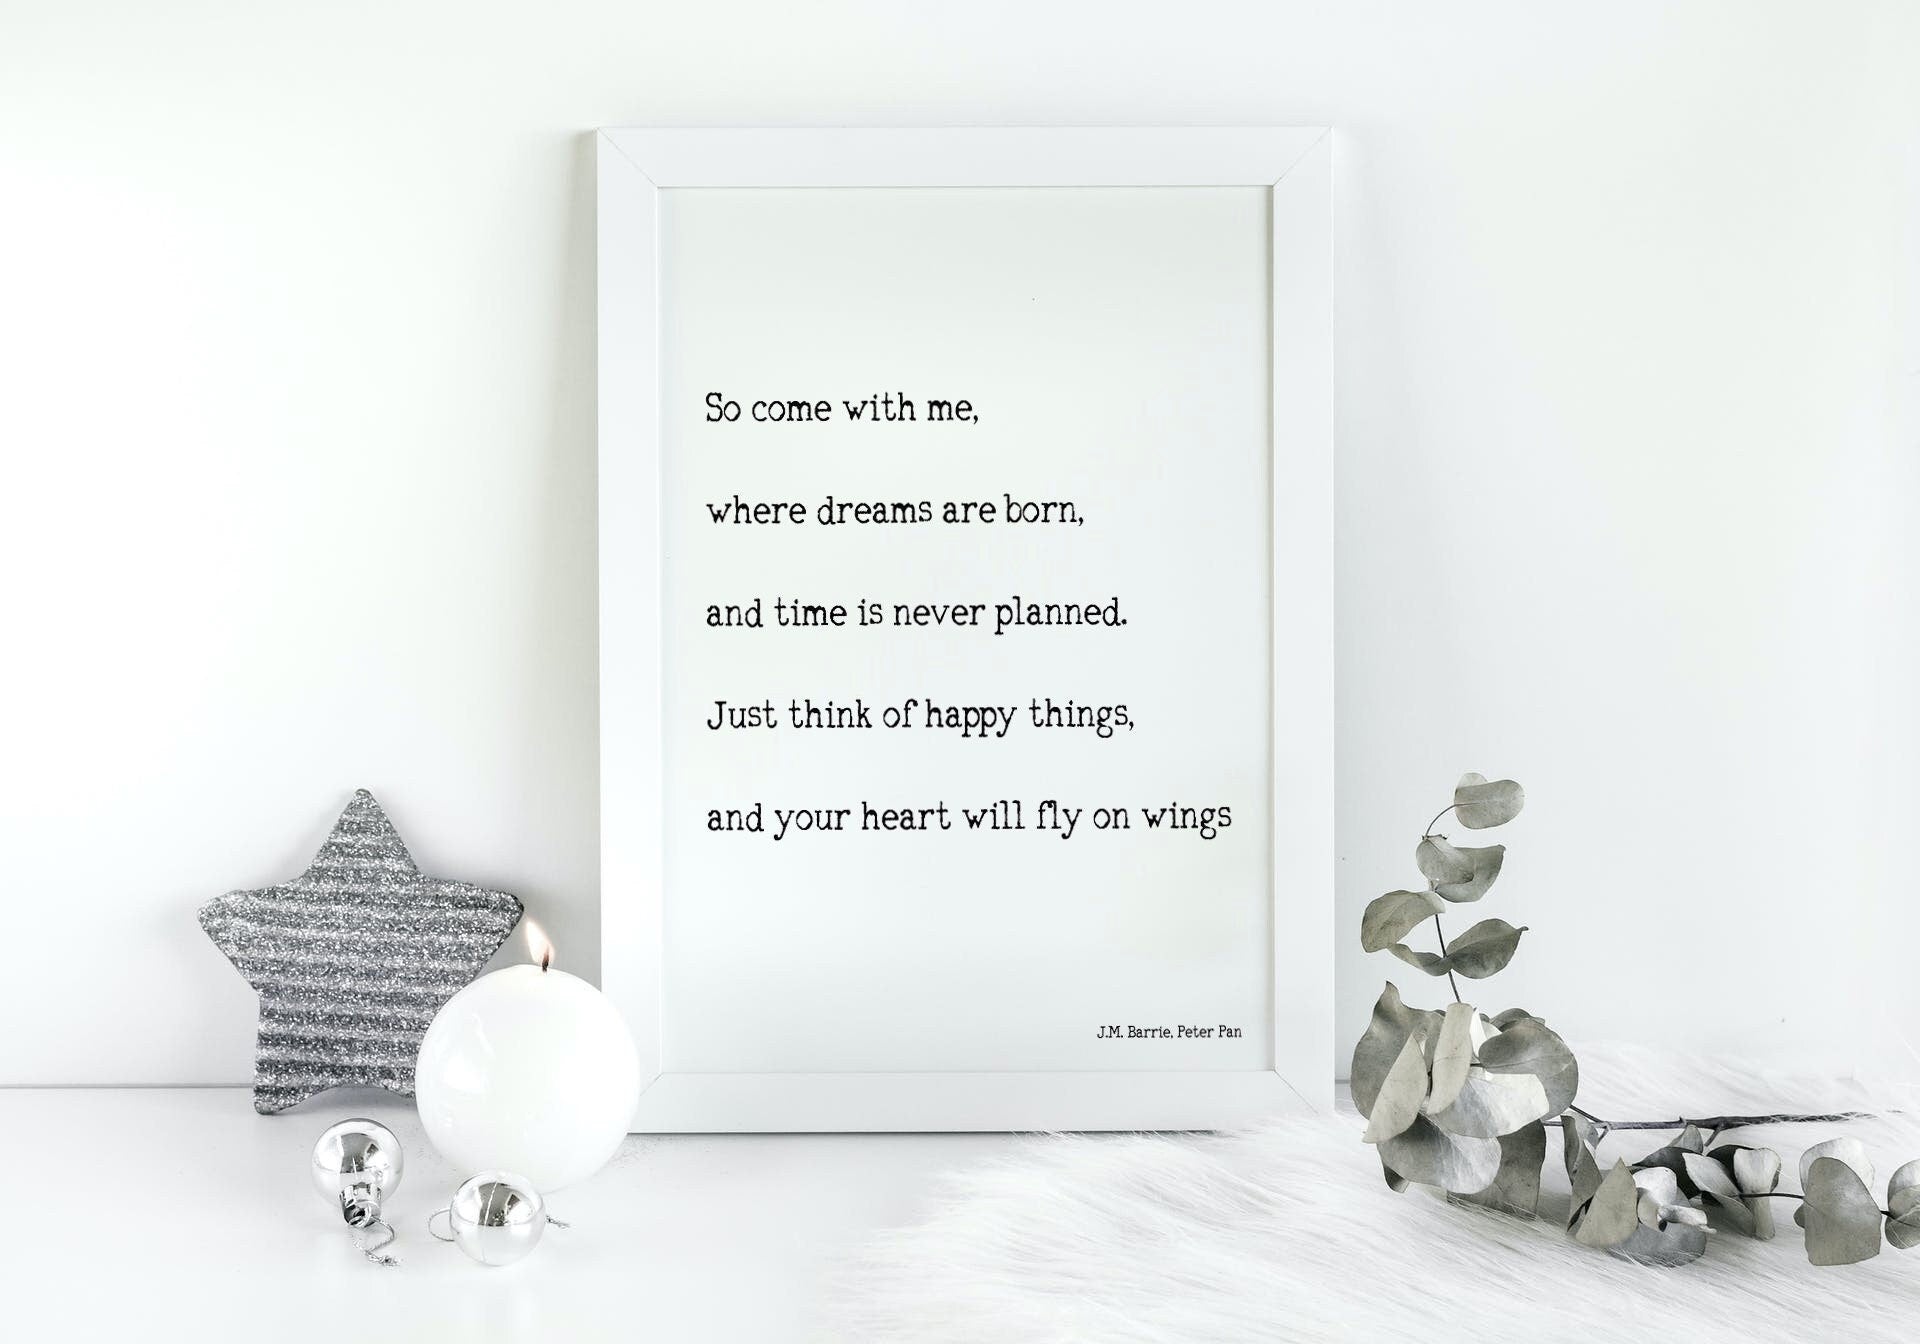 Peter Pan Wall Art Prints, Think Of Happy Things Inspirational Quote Print in Black & White